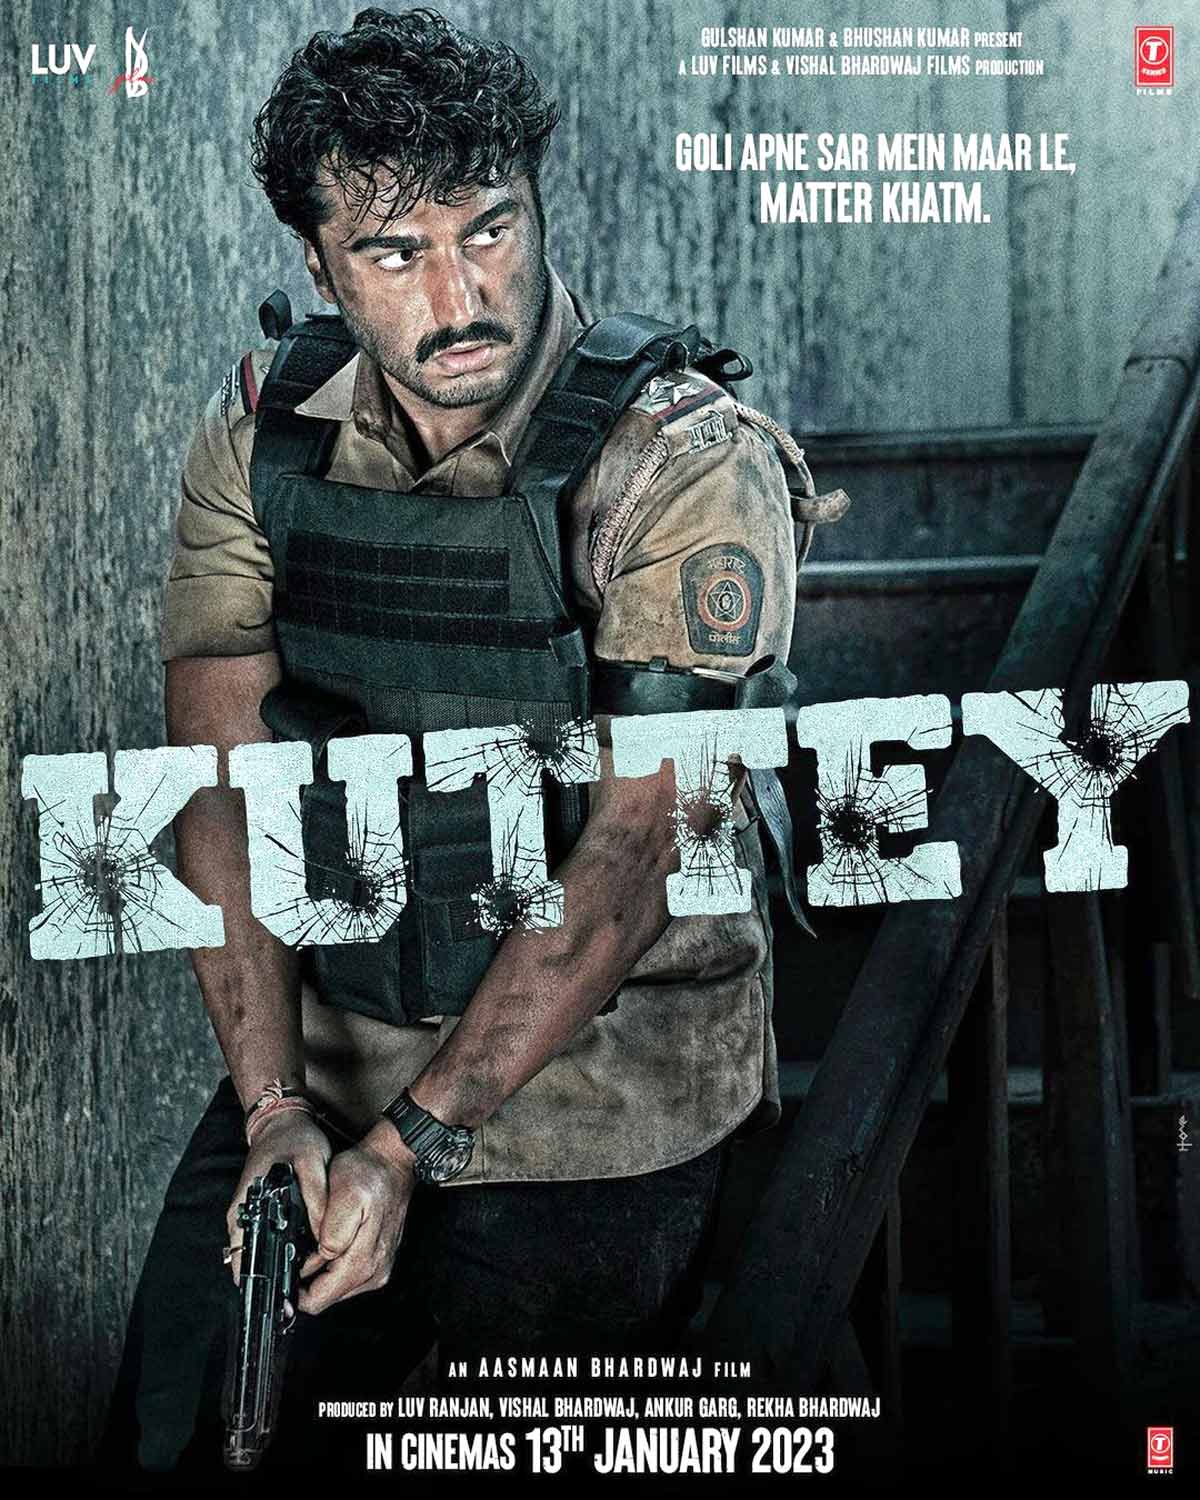 Are You Ready For These Kuttey? | Arjun Kapoor Kuttey Movie